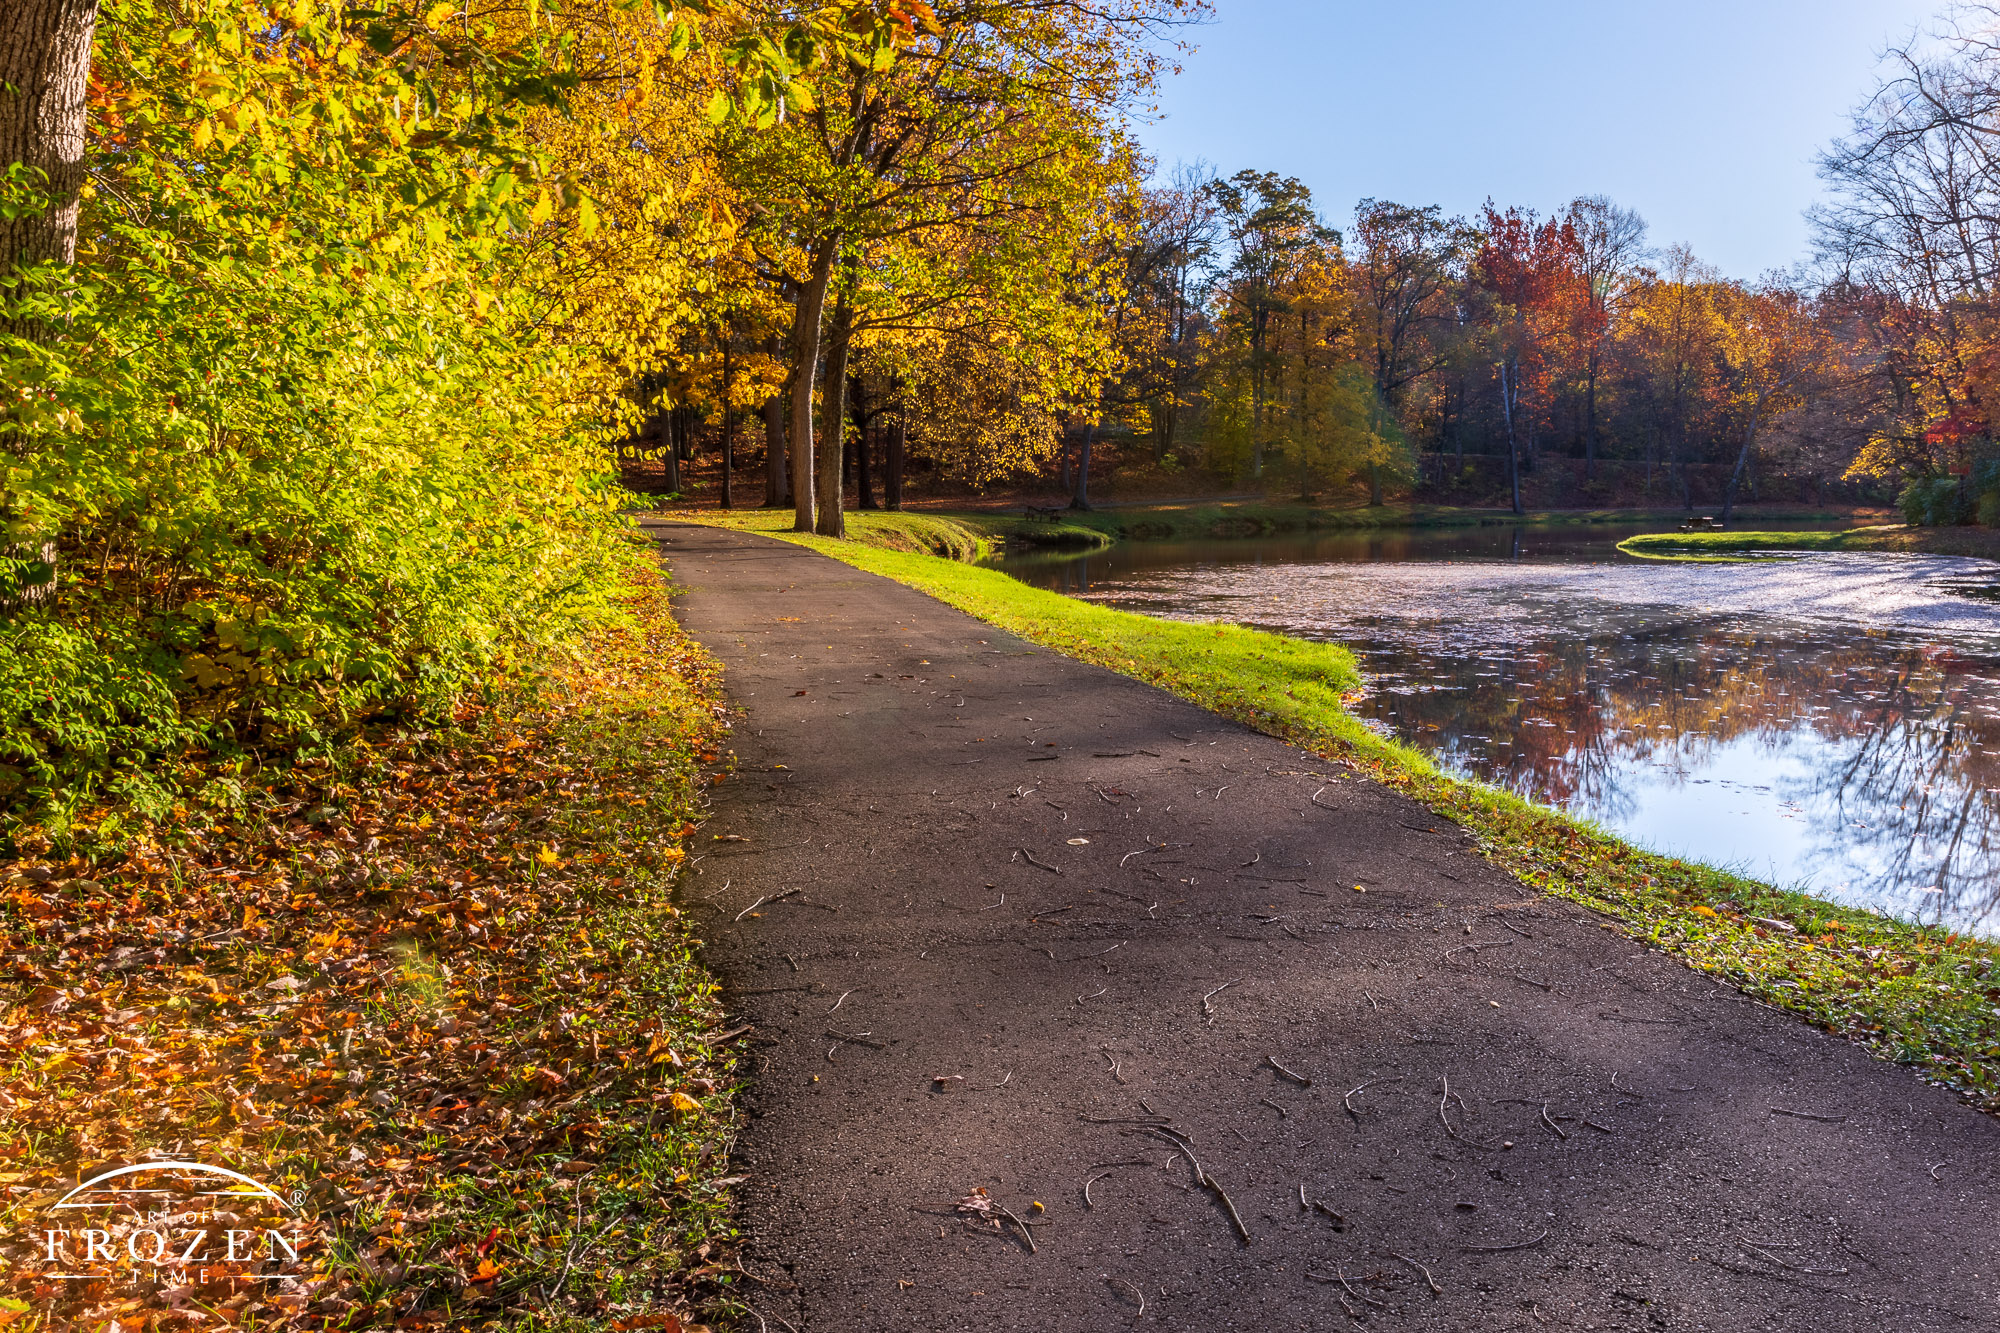 A paved walking path in Tawawa Park as the trail follows the meandering Tawawa Creek on a pretty fall evening where the low-angled sunlight basks the pathway in golden light